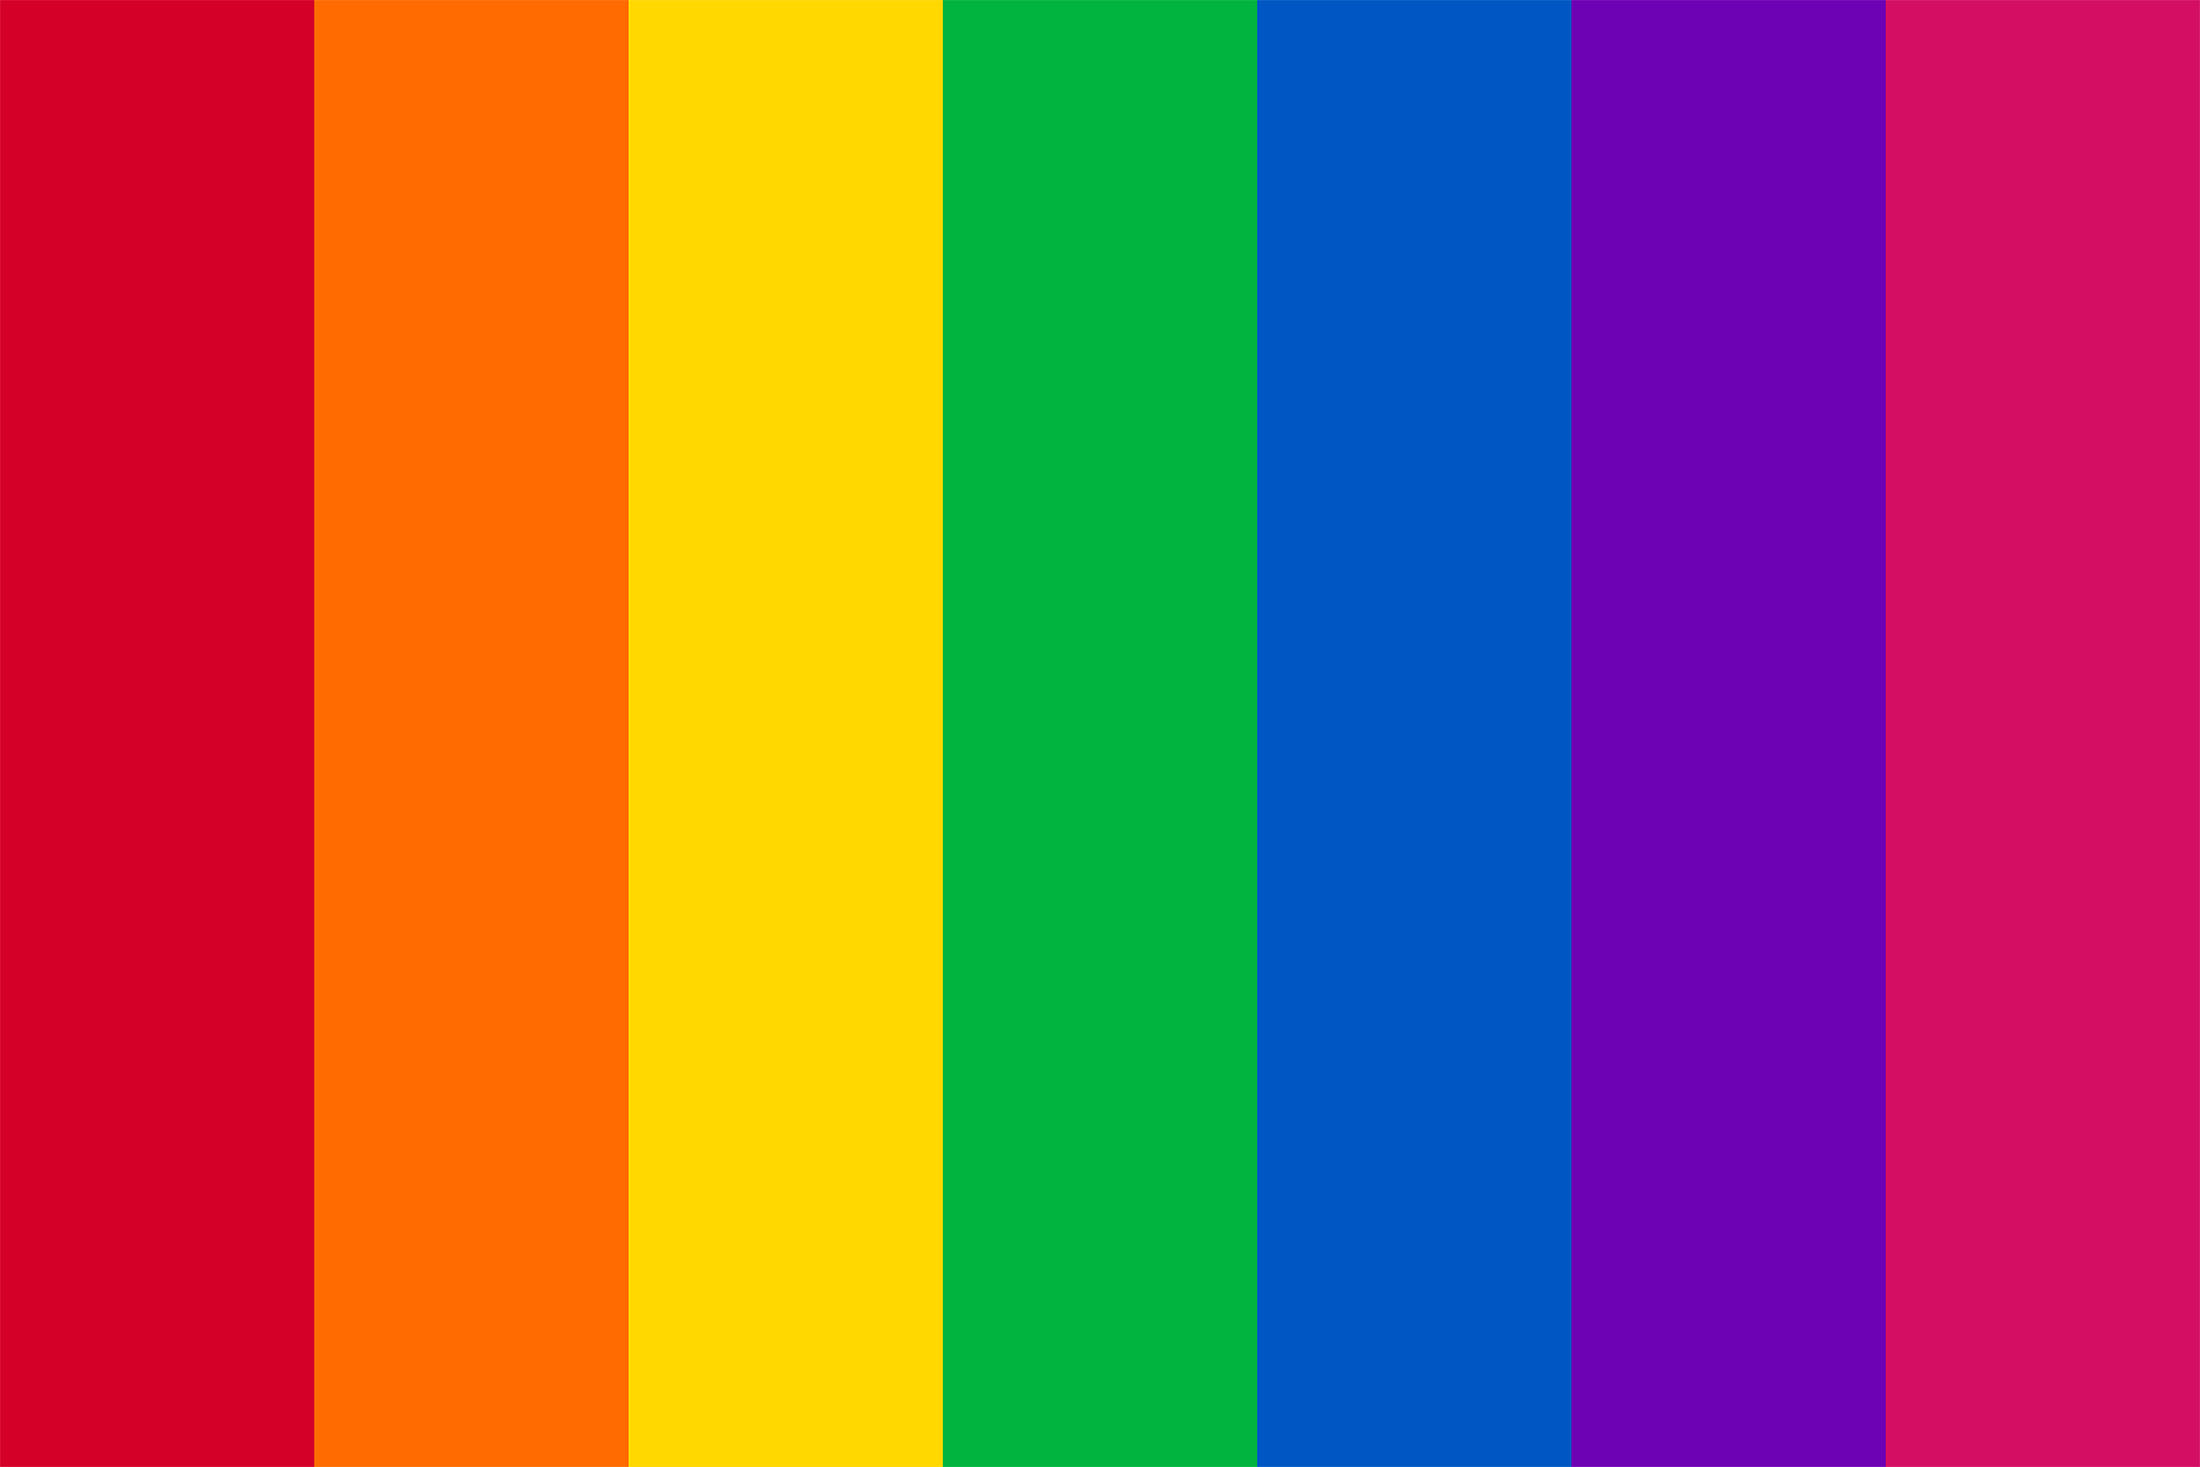 The Perfectly Pitched rainbow, showing vertical bars of red, orange, yellow, green, blue, purple, and pink.